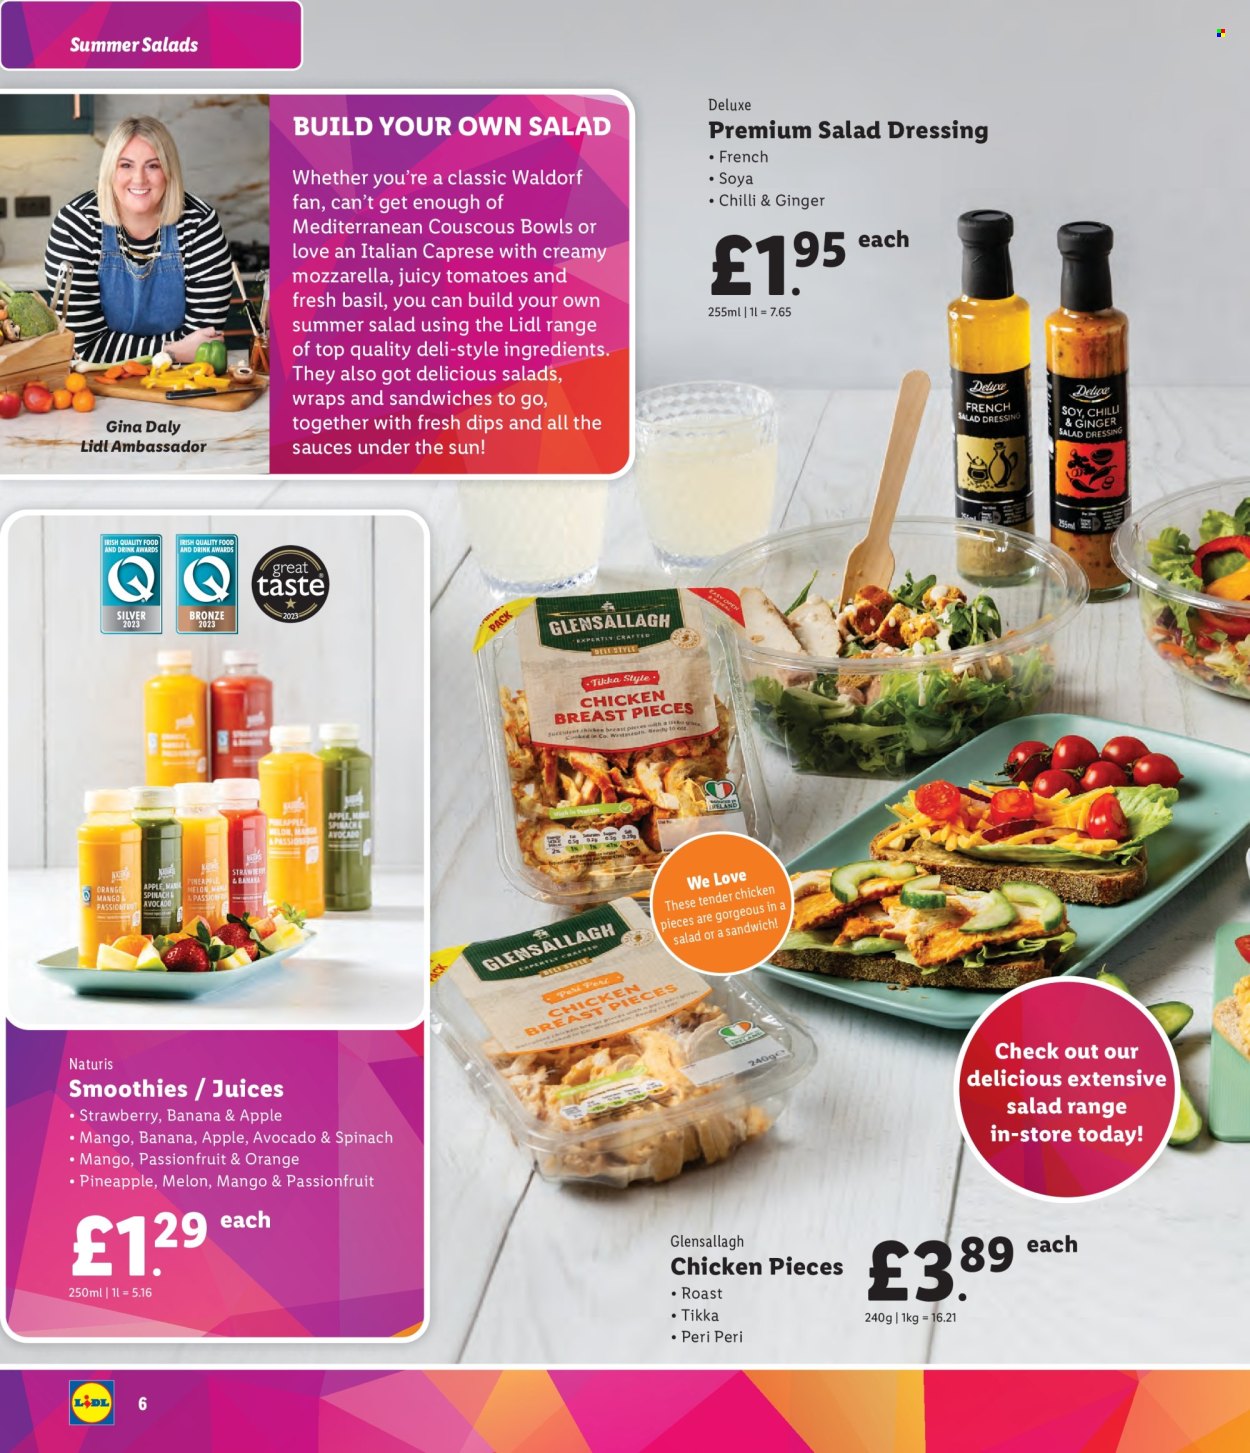 thumbnail - Lidl offer  - Sales products - avocado, pineapple, melons, roast, wraps, sandwich, mozzarella, cheese, couscous, basil, salad dressing, dressing, juice, smoothie, bowl, Tikka. Page 6.